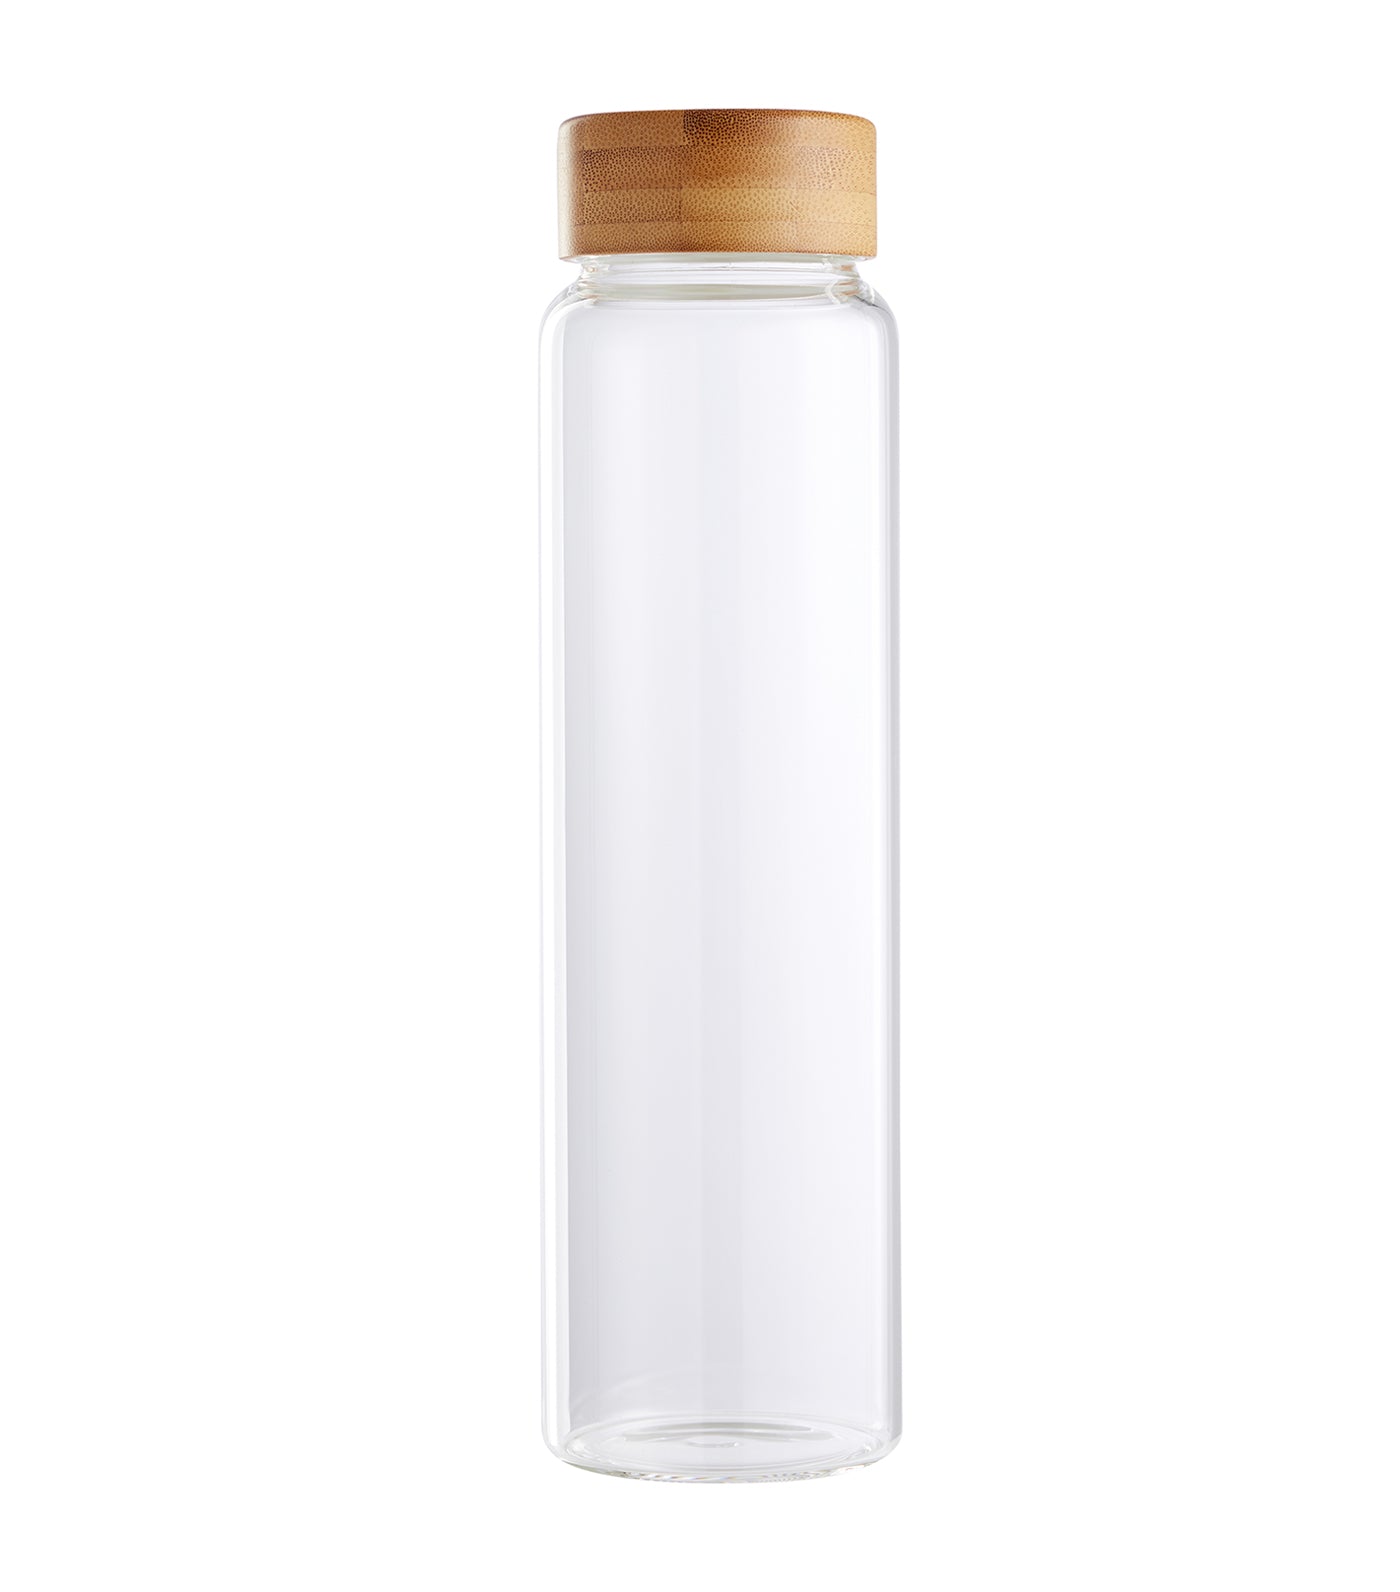 glass water carafe with bamboo lid